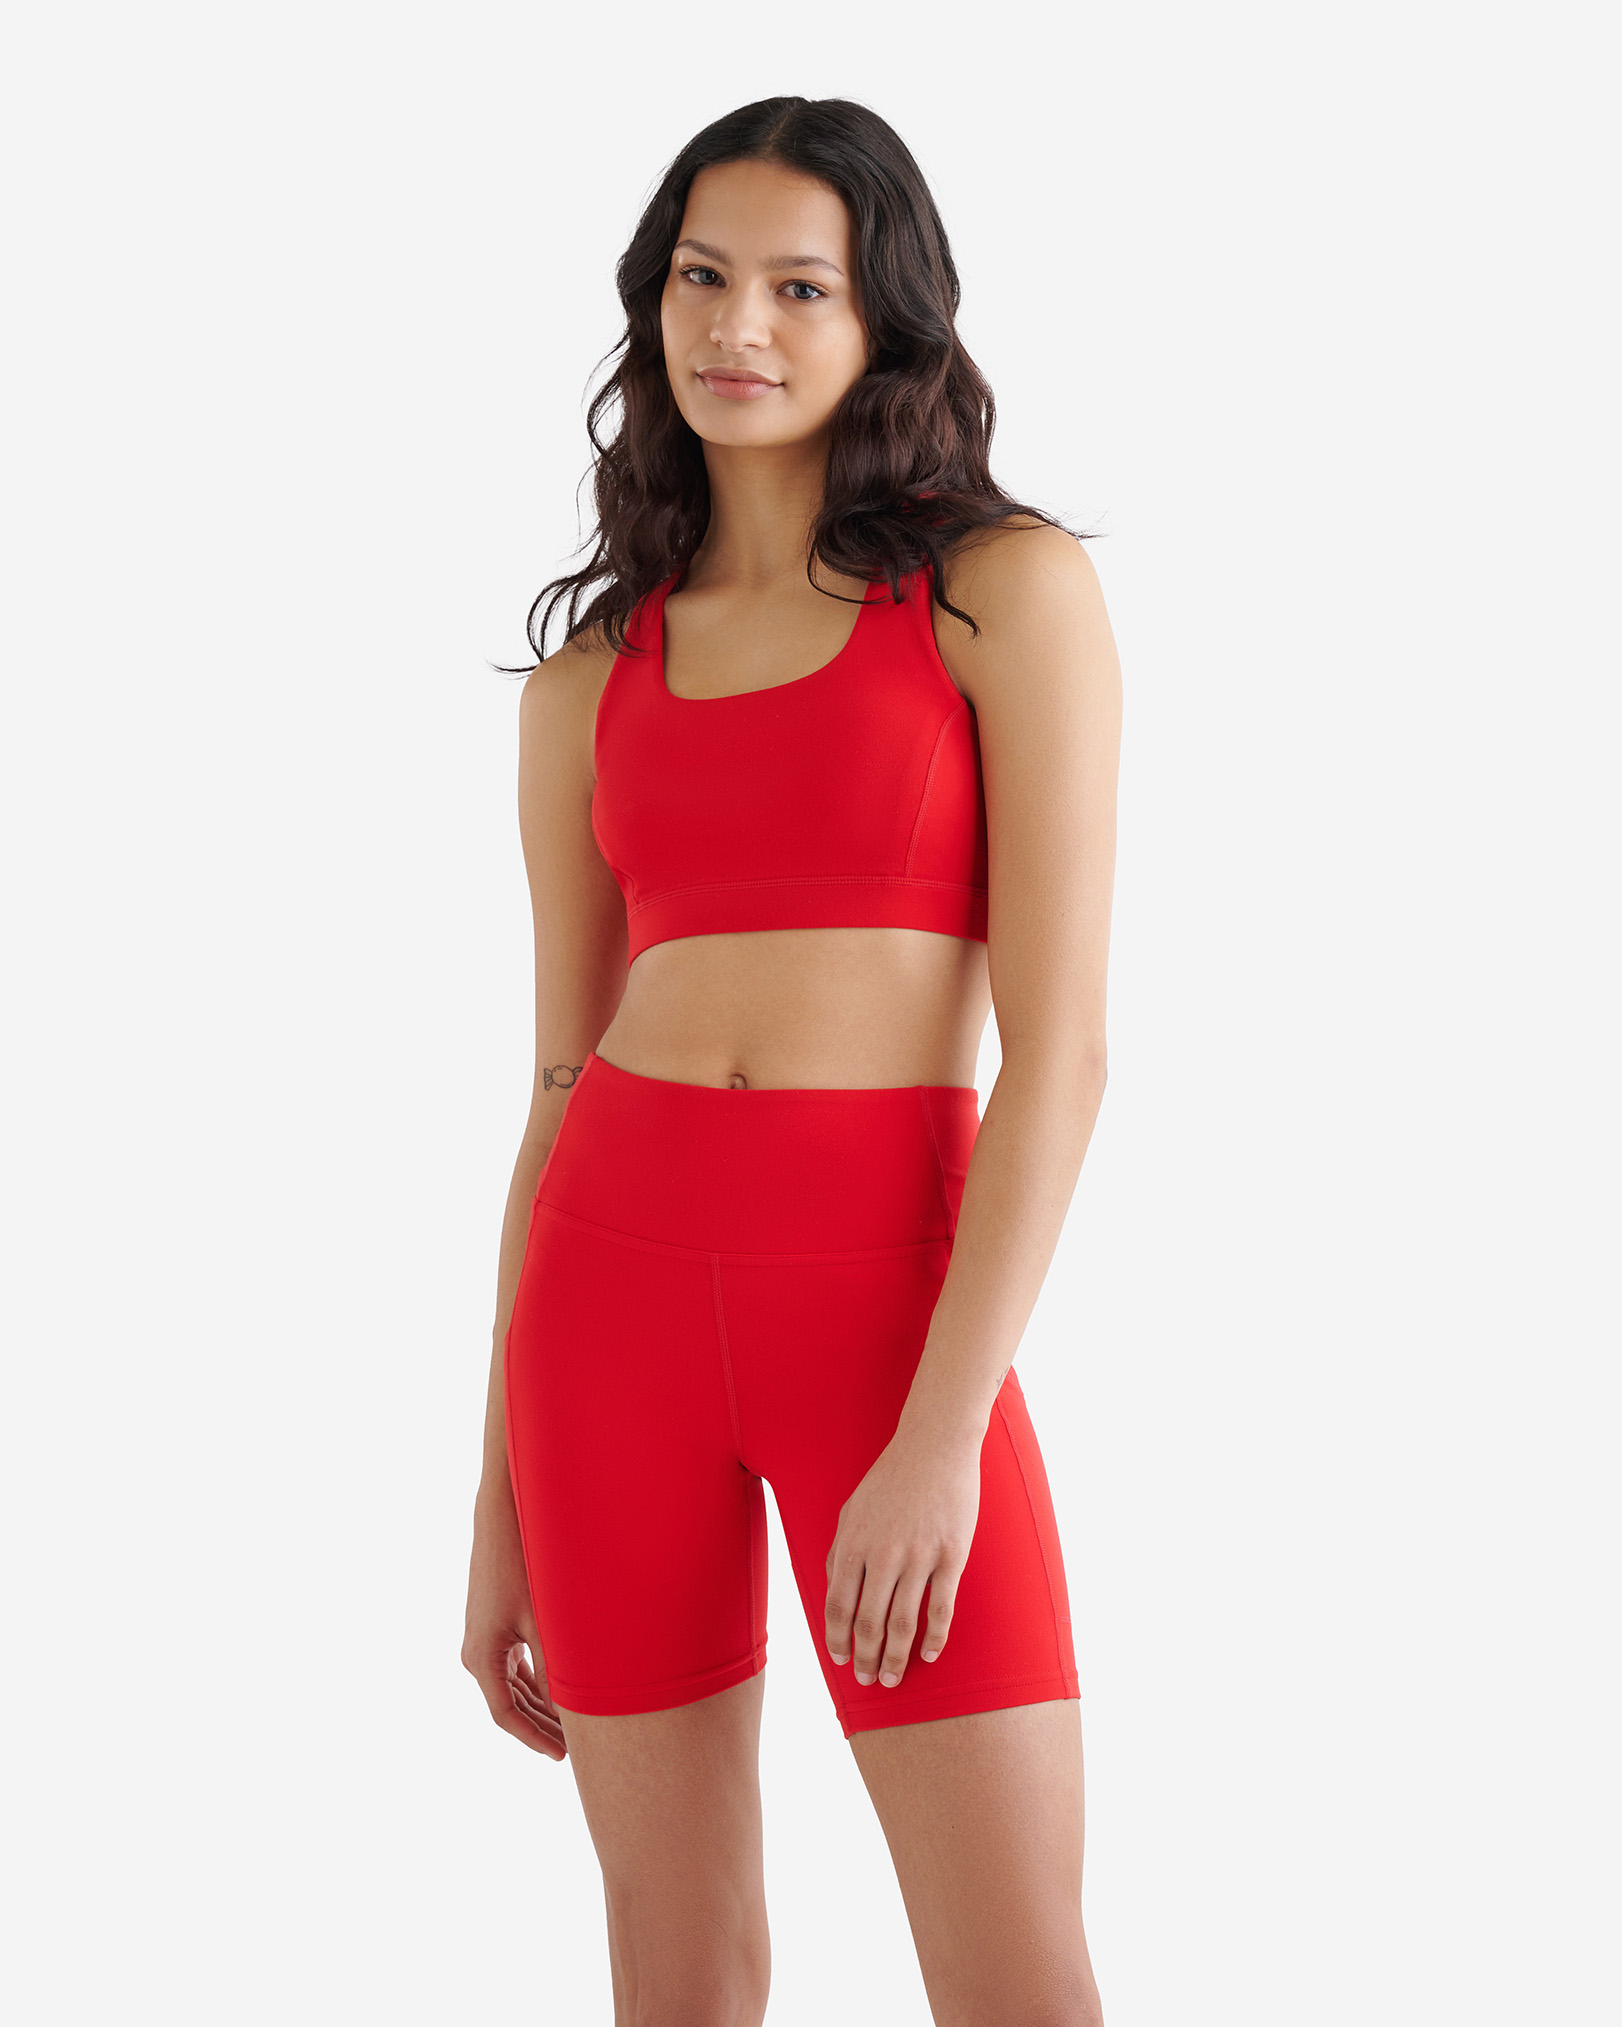 Roots Restore Sports Bra Shirt in Jam Red